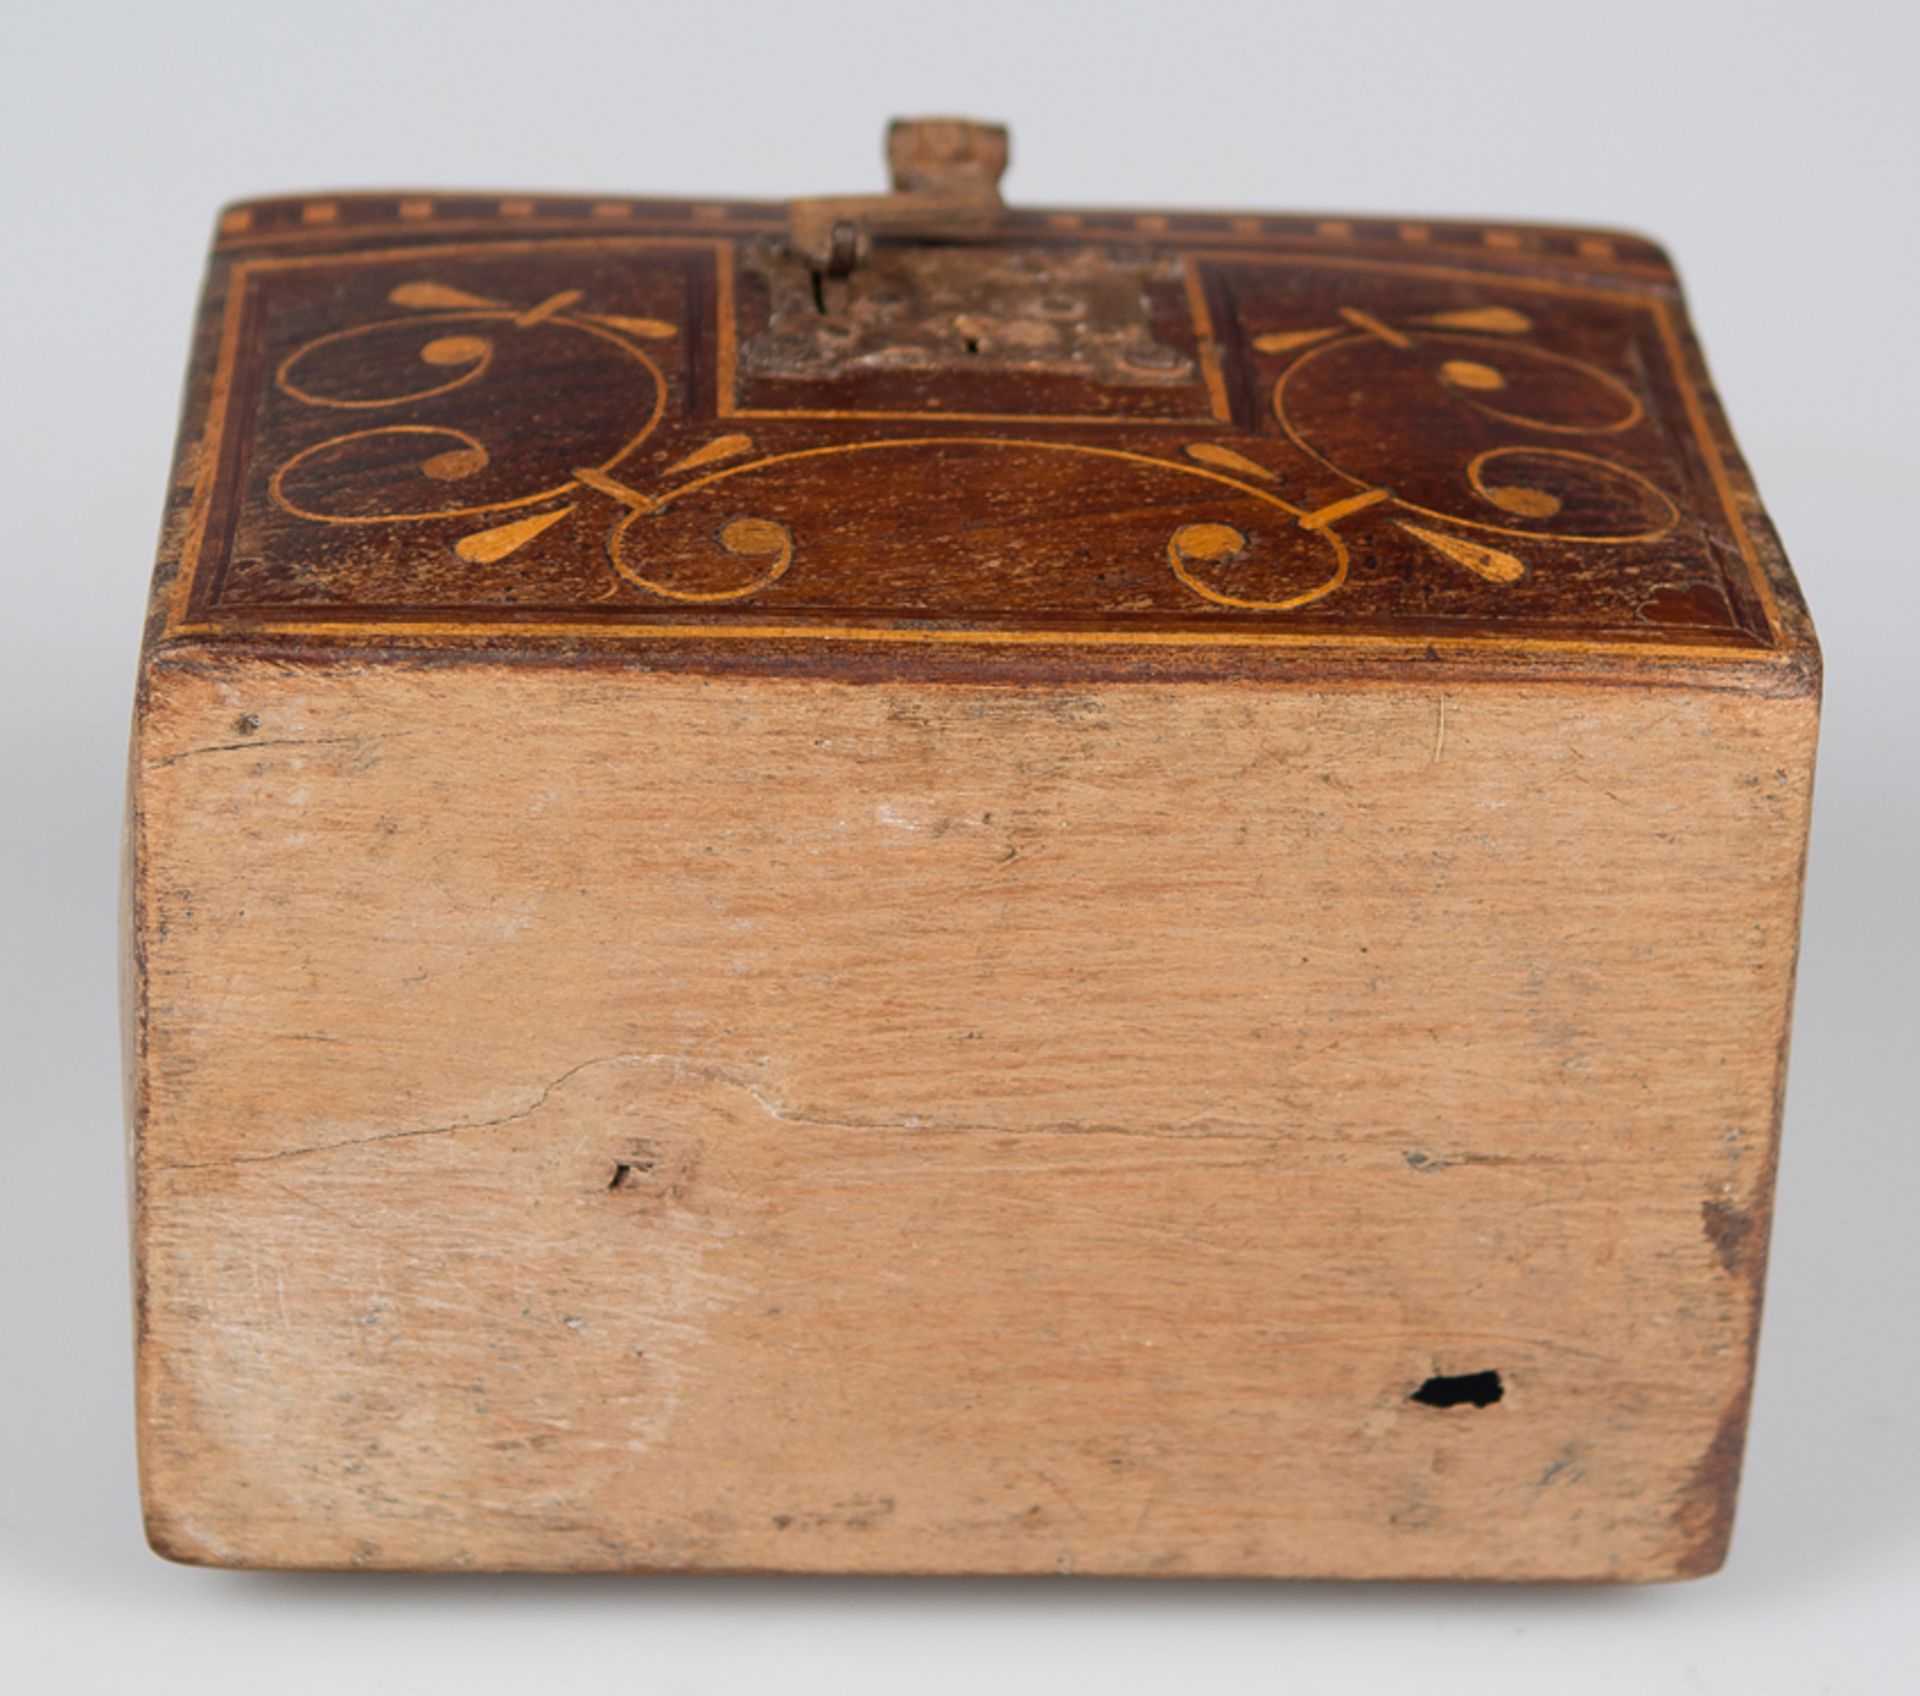 Small wooden chest with boxwood inlay and ironwork. Spain or New Spain. 18th century. - Bild 5 aus 5